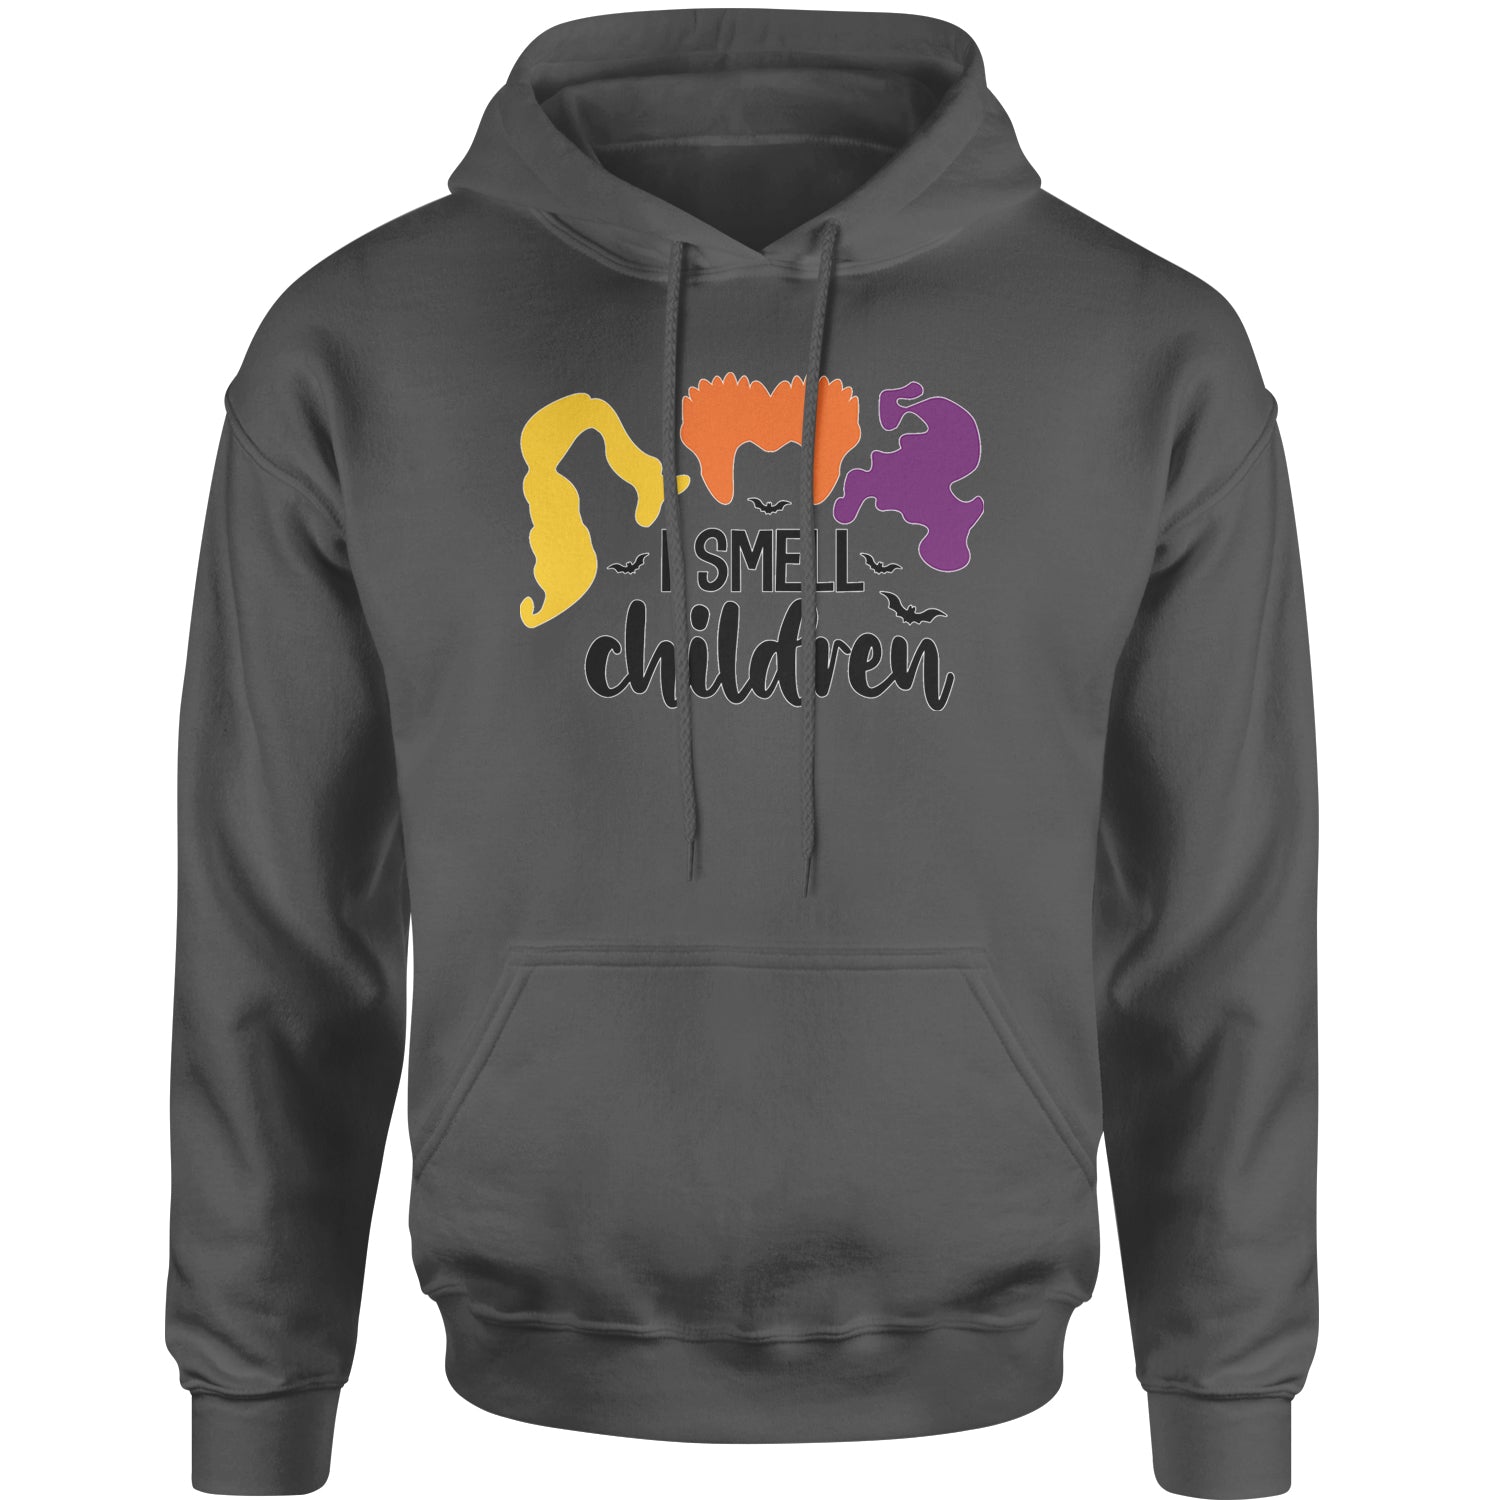 I Smell Children Hocus Pocus Adult Hoodie Sweatshirt descendants, enchanted, eve, hallows, hocus, or, pocus, sanderson, sisters, treat, trick, witches by Expression Tees